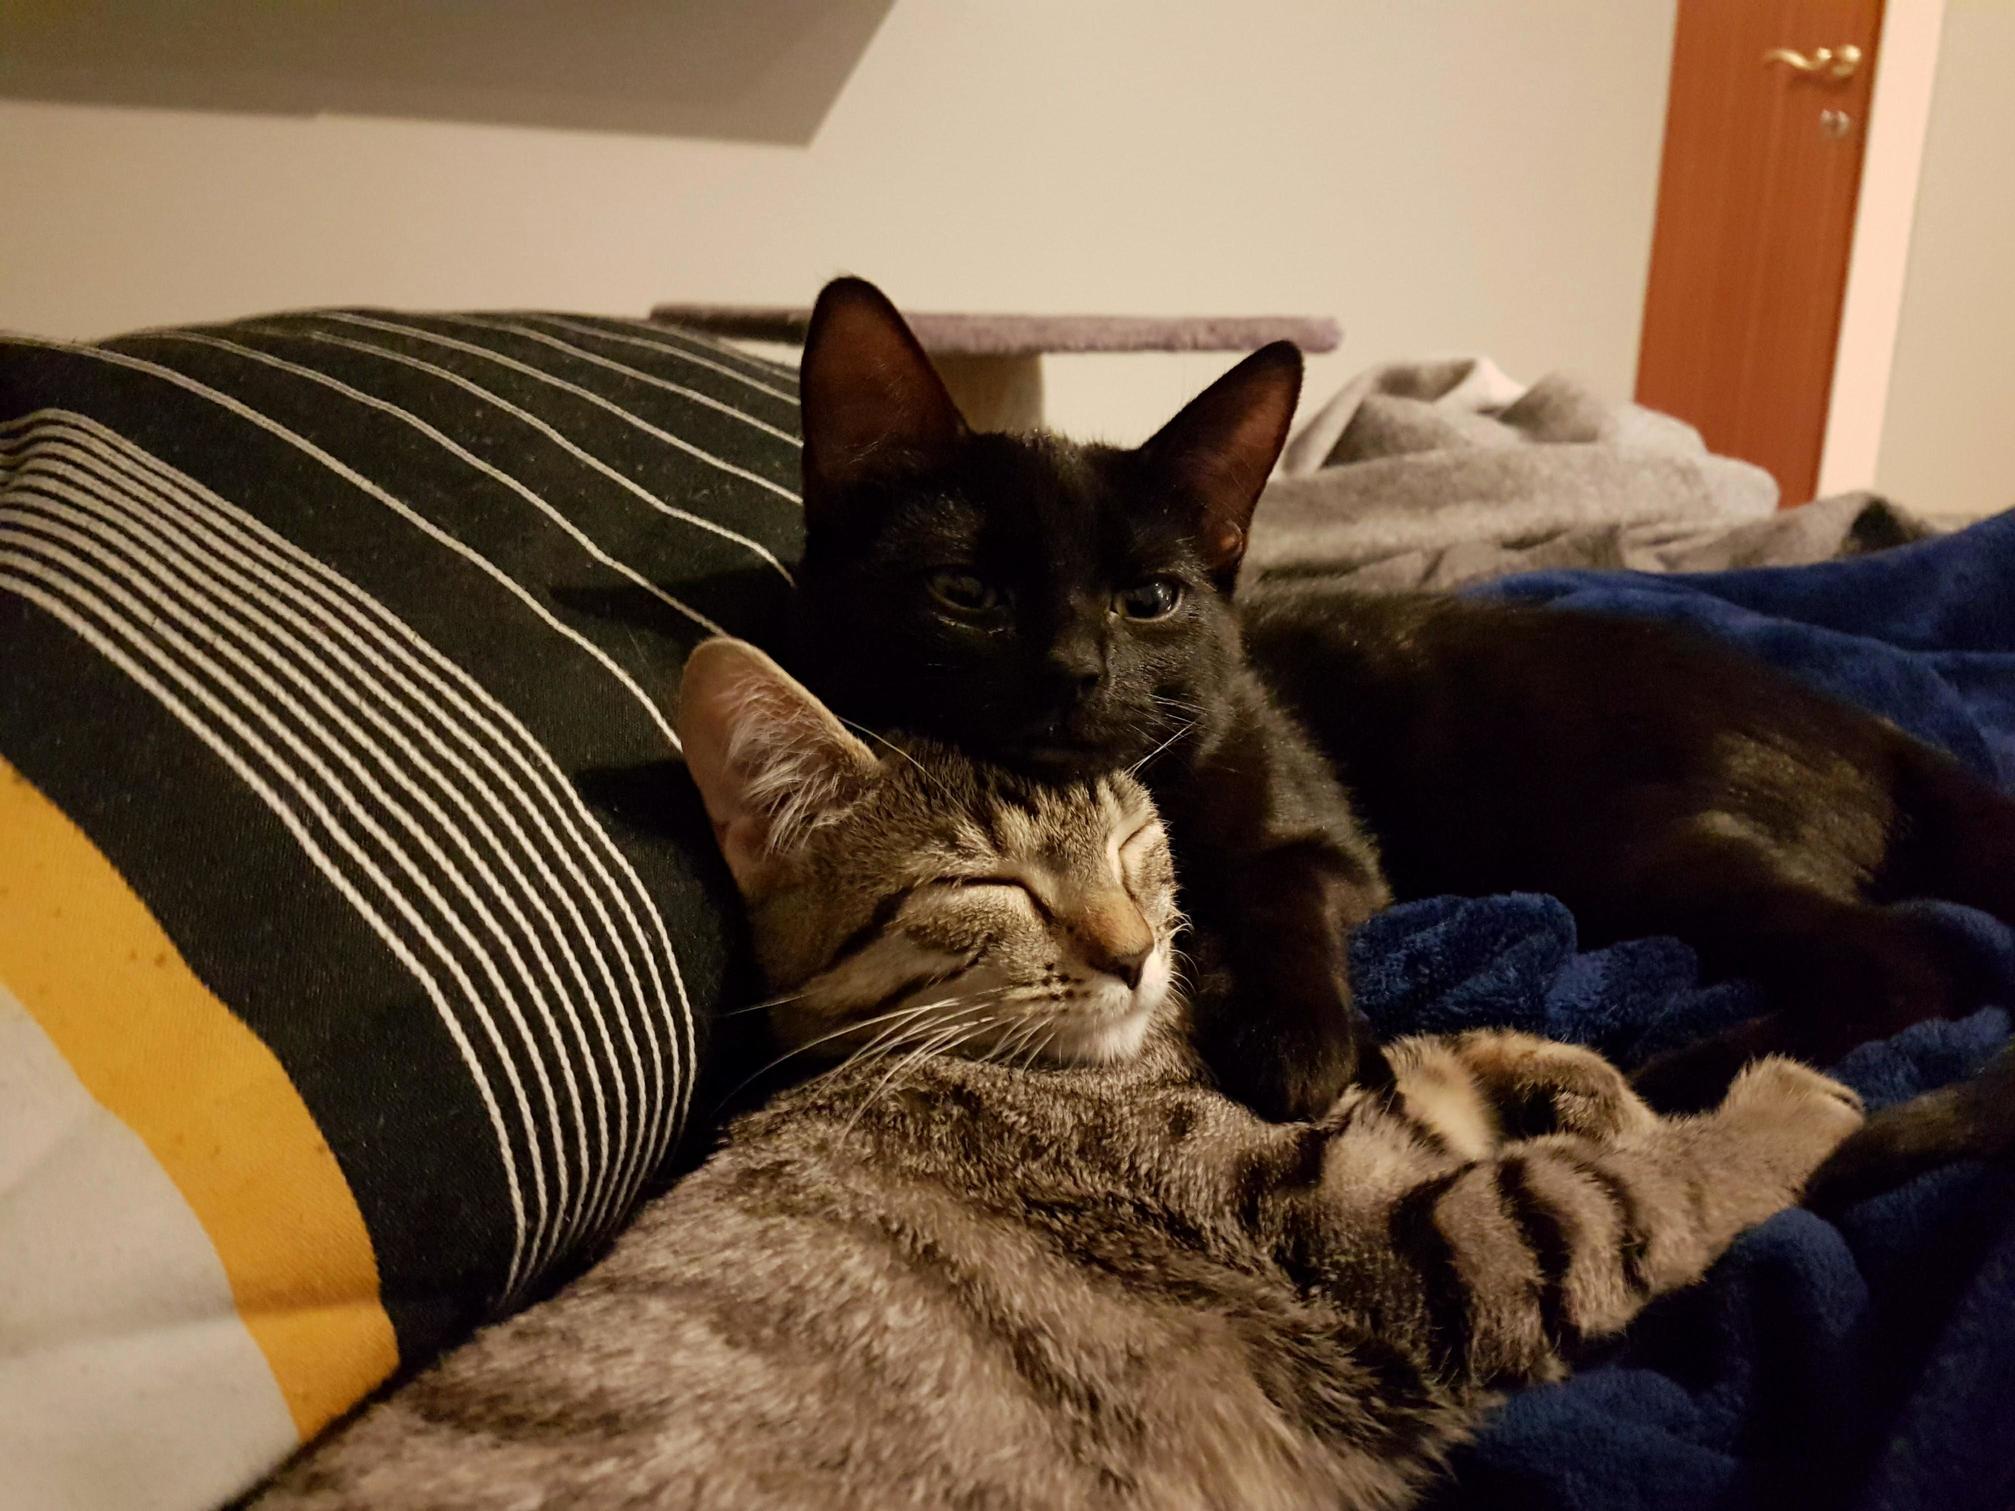 Kittens chilling on a friday night